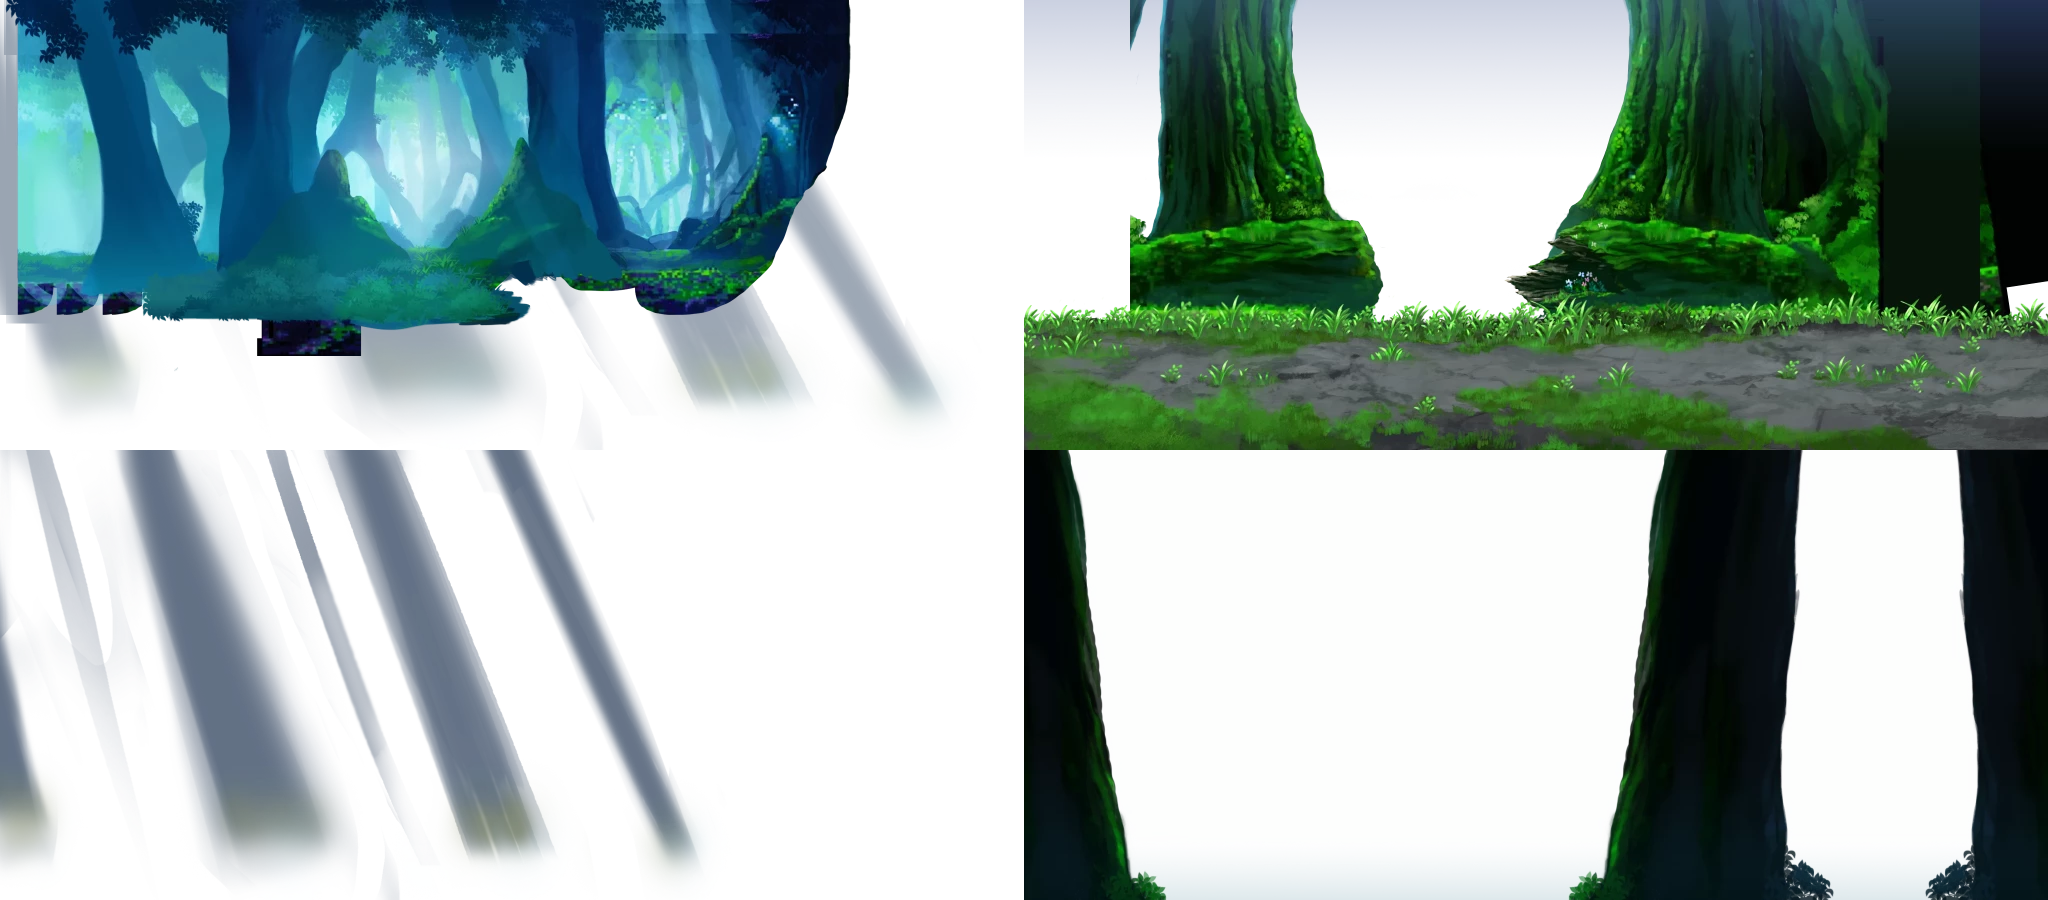 Jugdral (Forest)